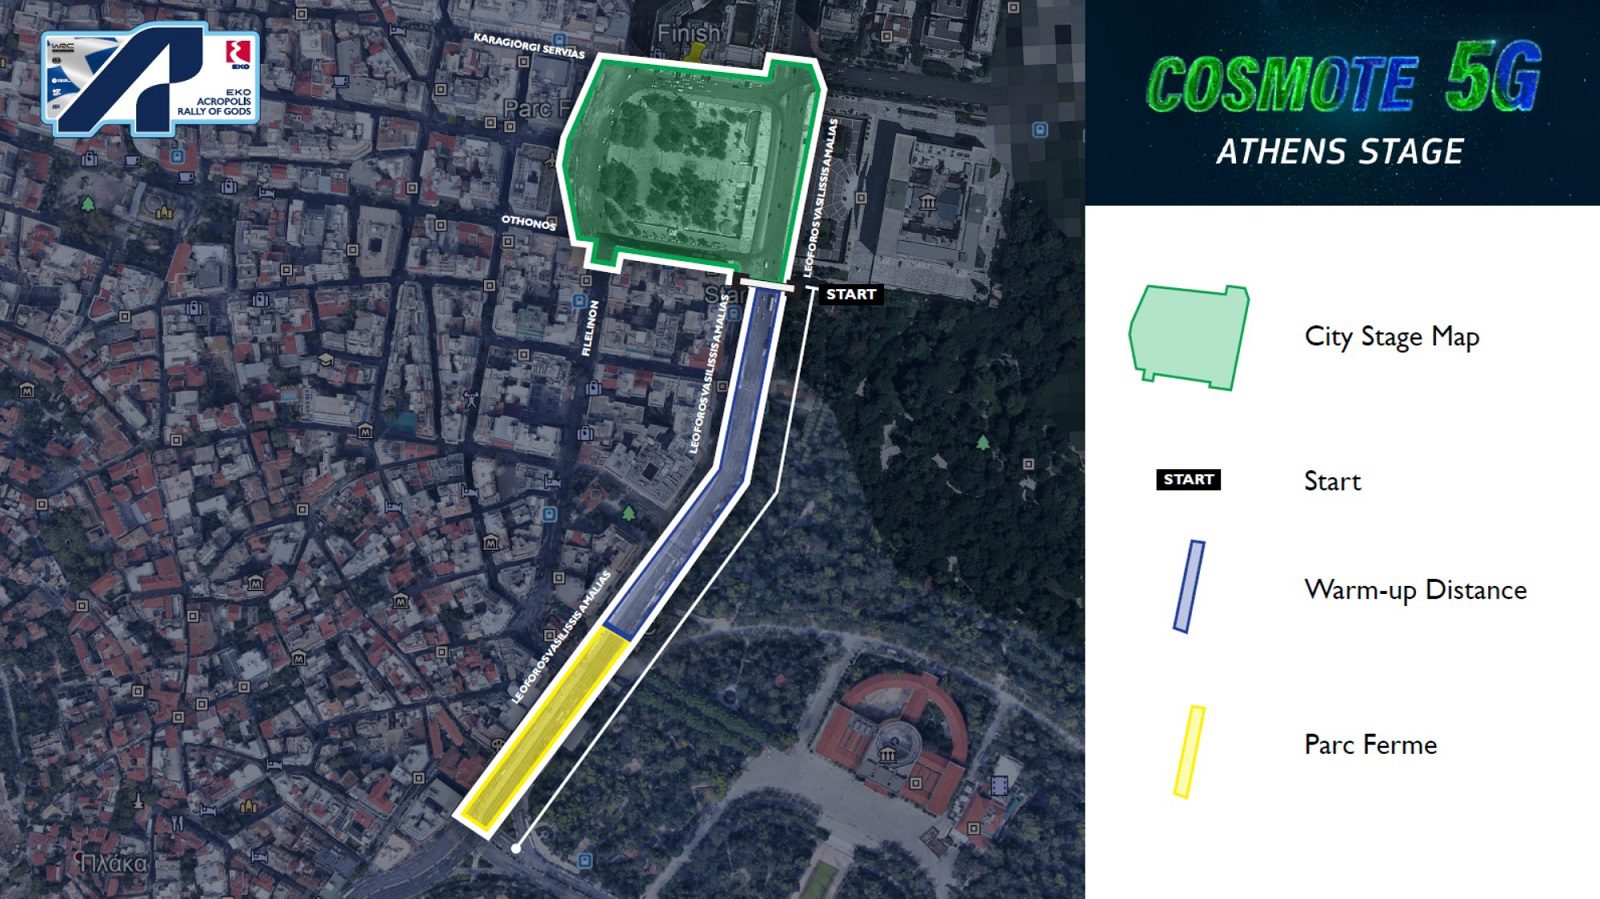 COSMOTE 5G Athens Stage